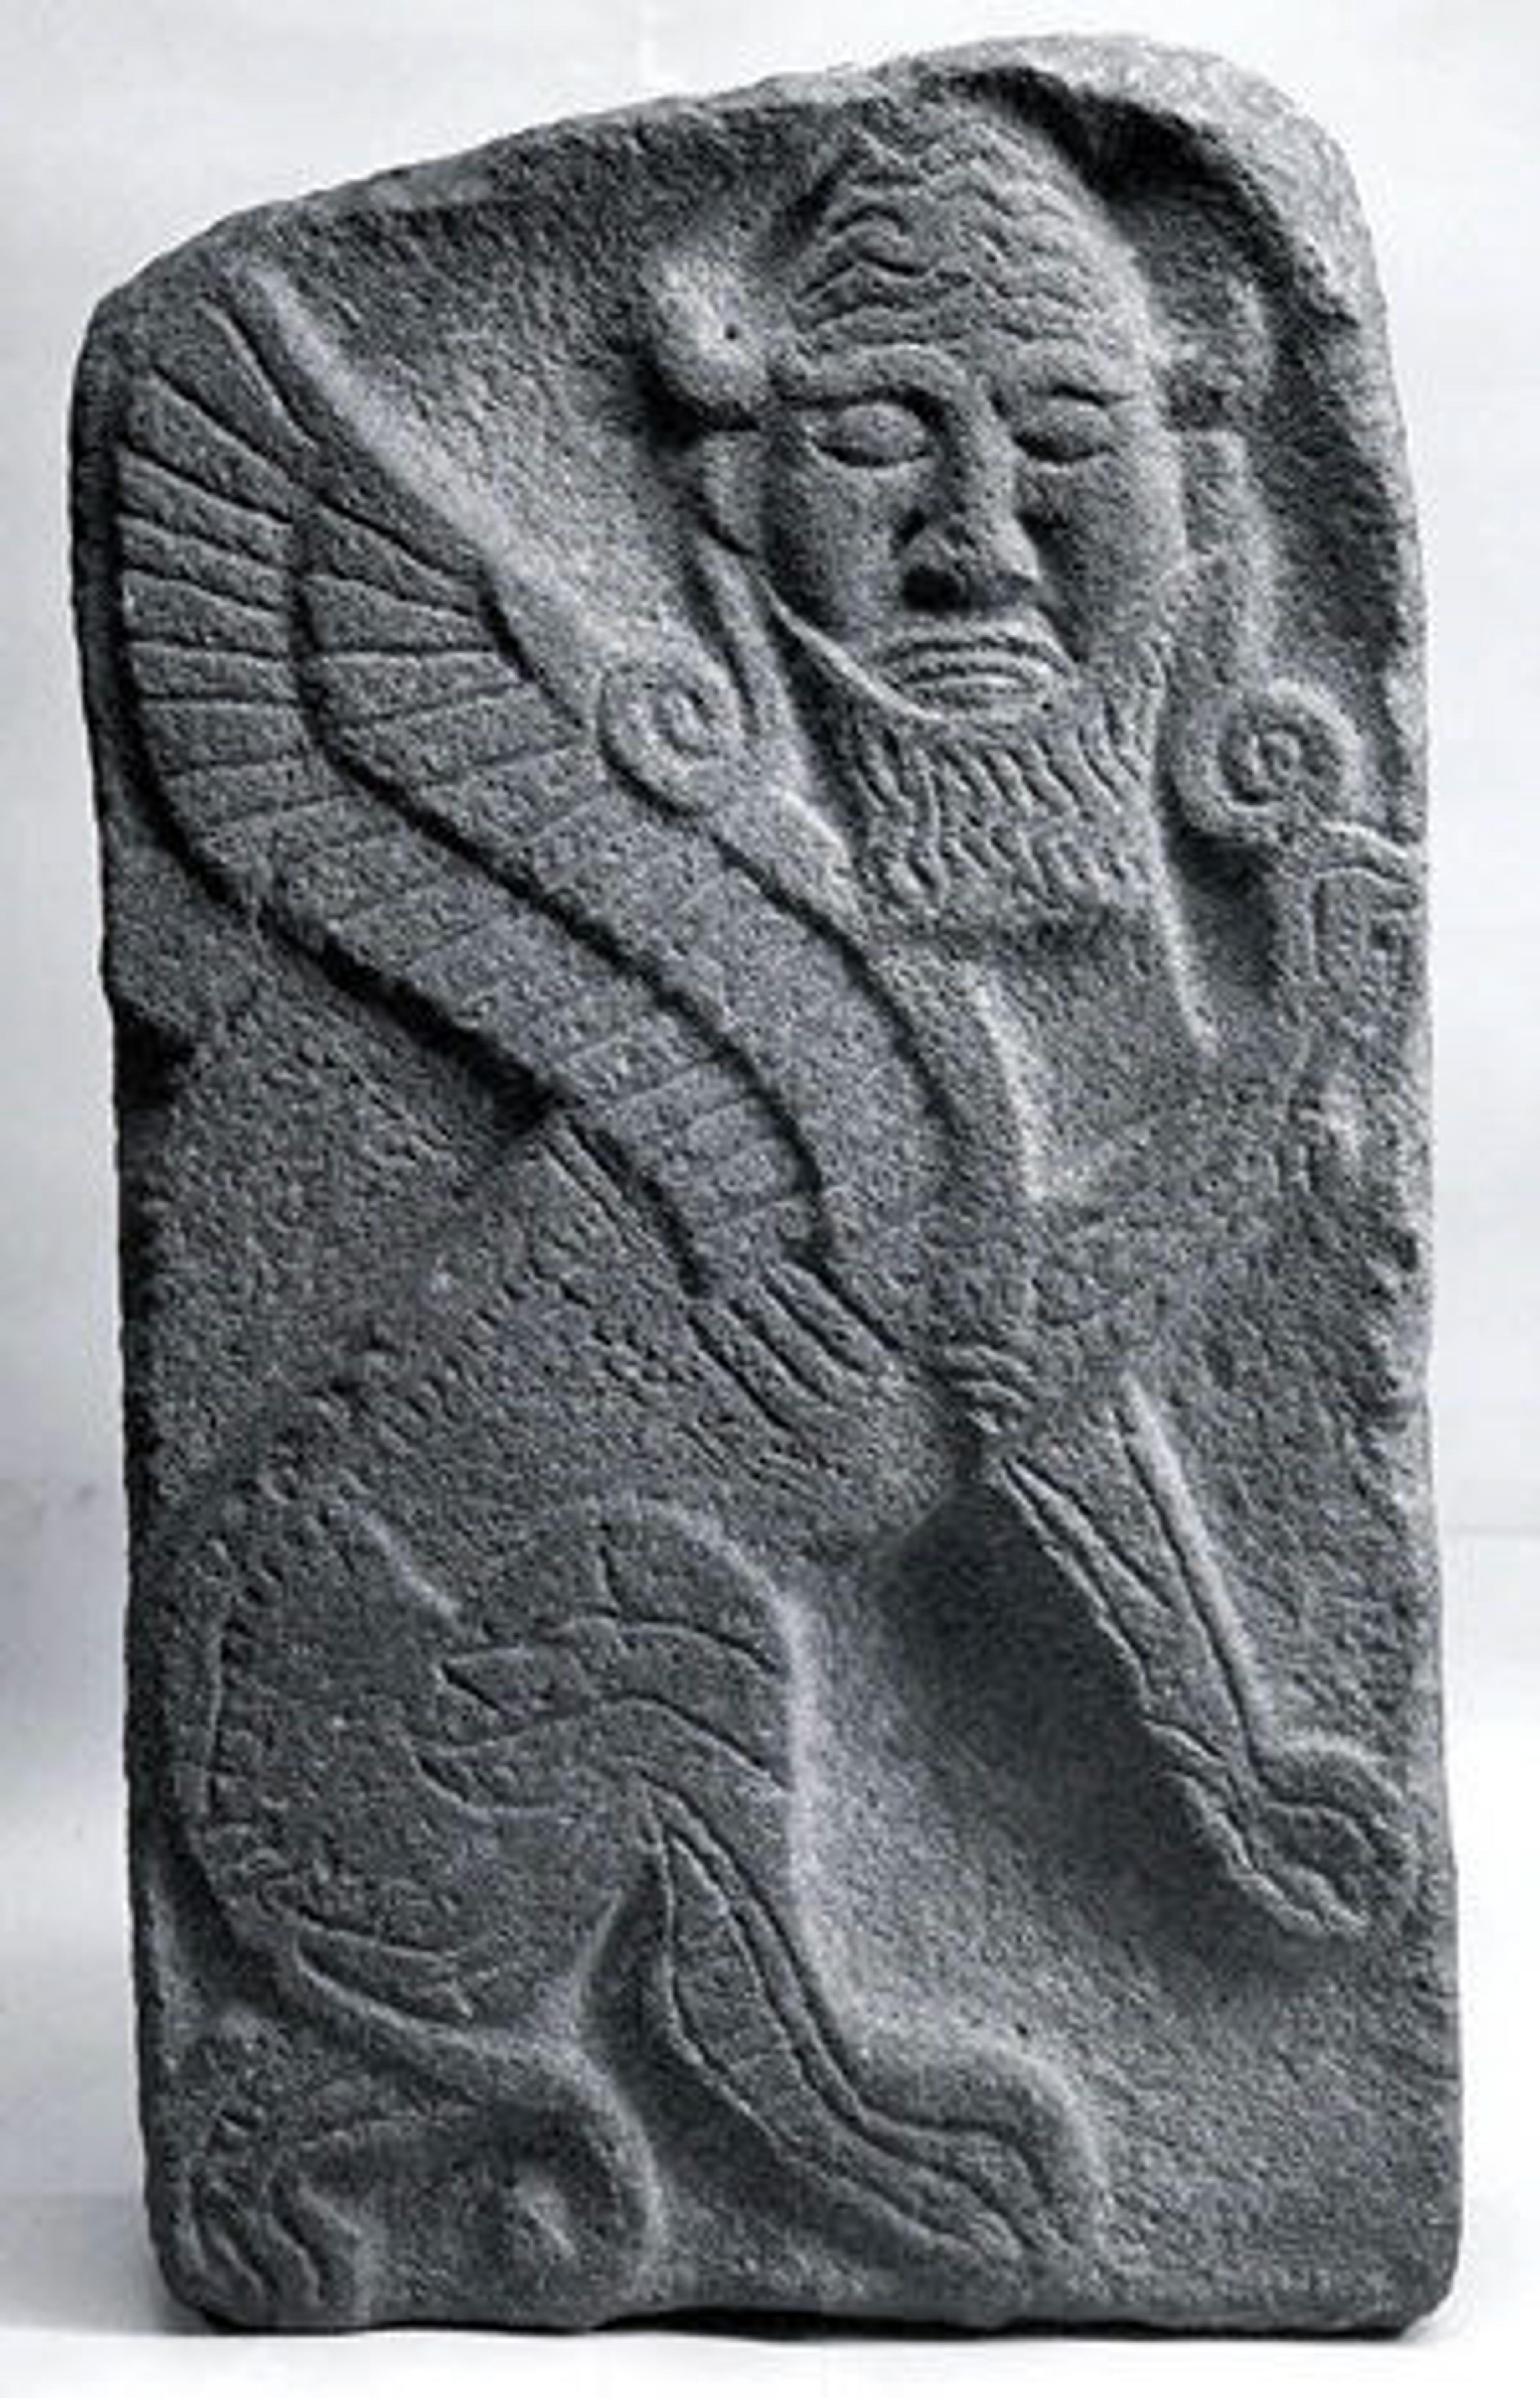 Orthostat relief: winged human-headed bull (43.135.4)